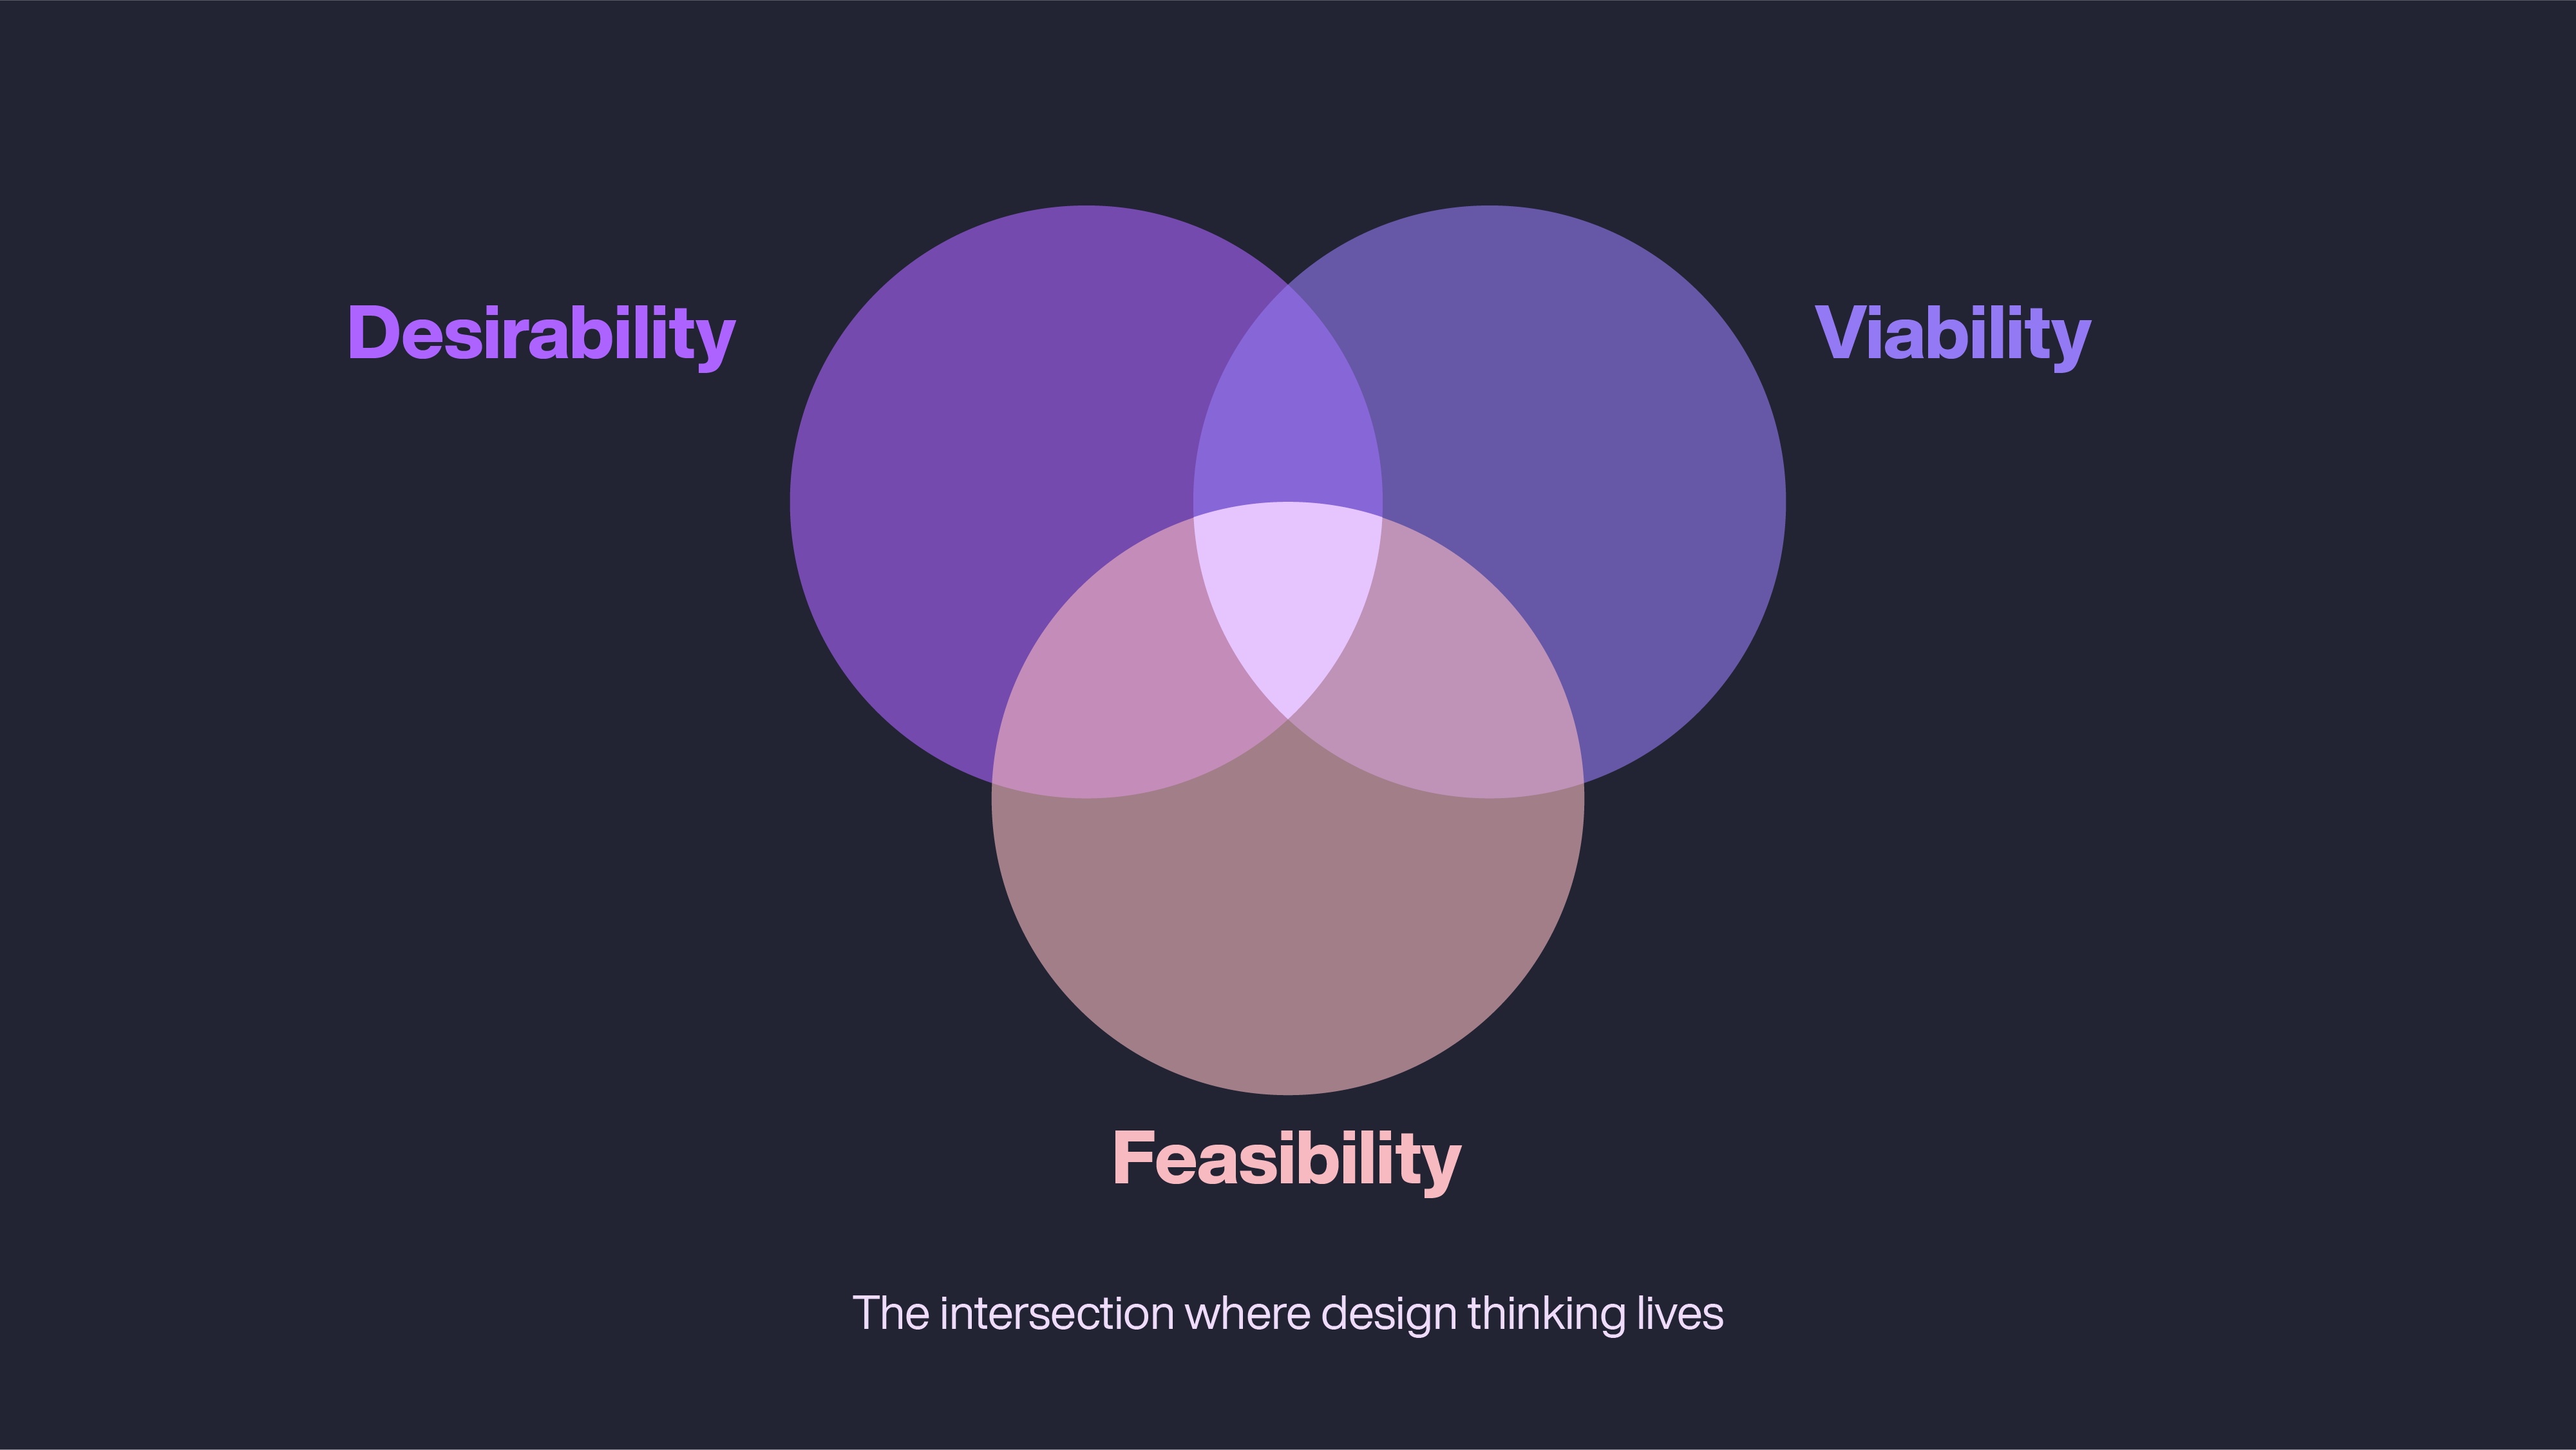 The intersection where design think lives: Desirability, Viability, Feasability.